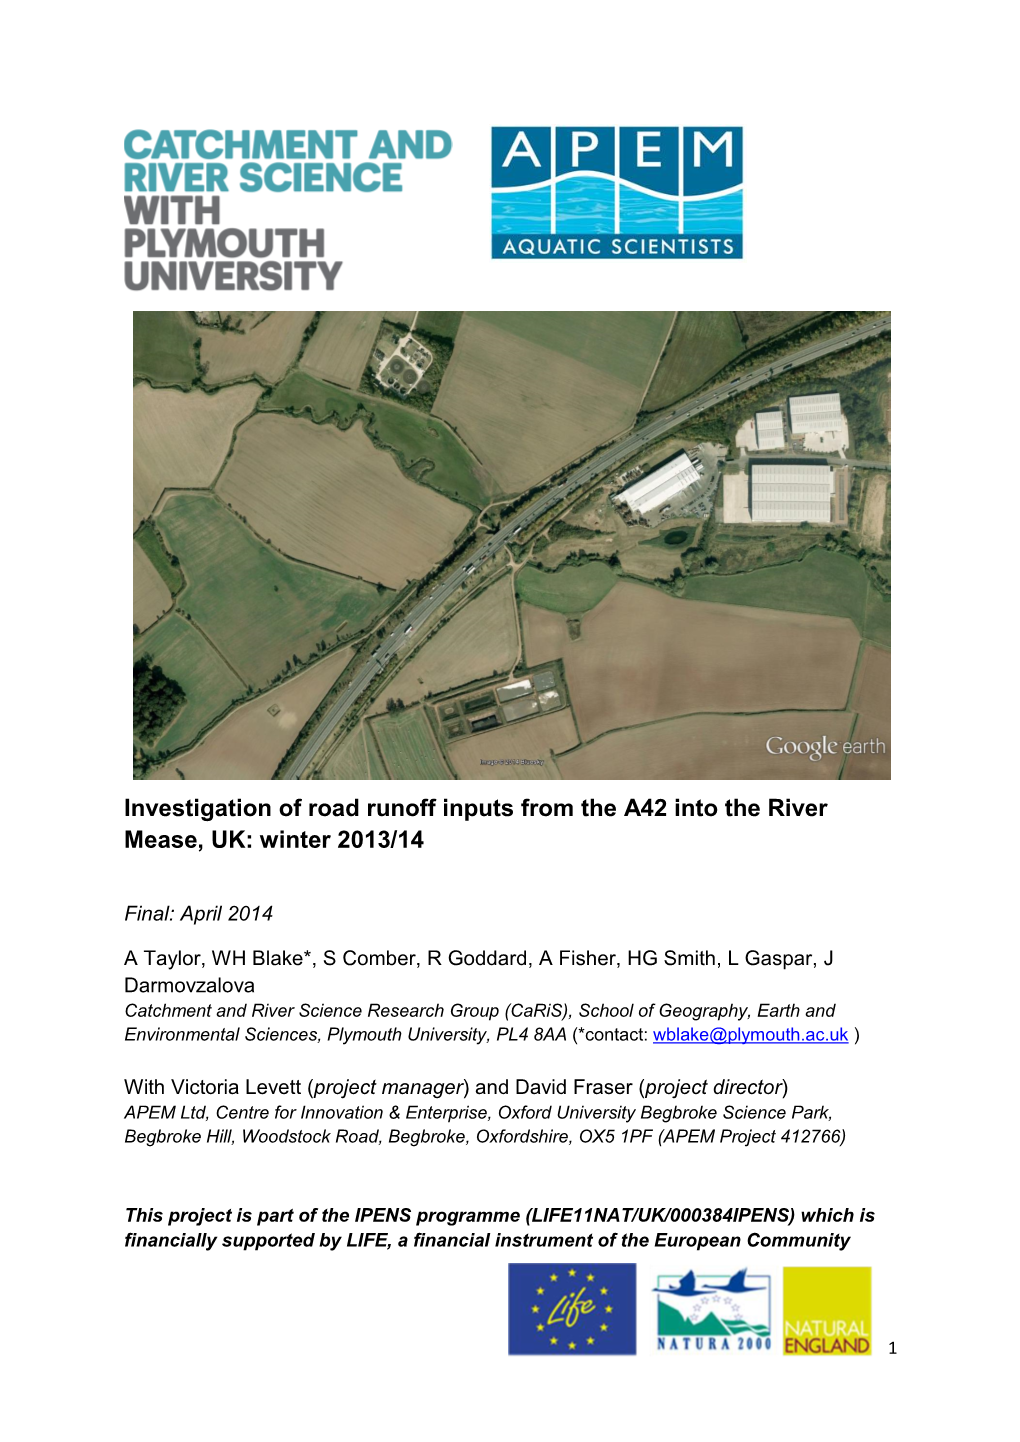 Investigation of Road Runoff Inputs from the A42 Into the River Mease, UK: Winter 2013/14